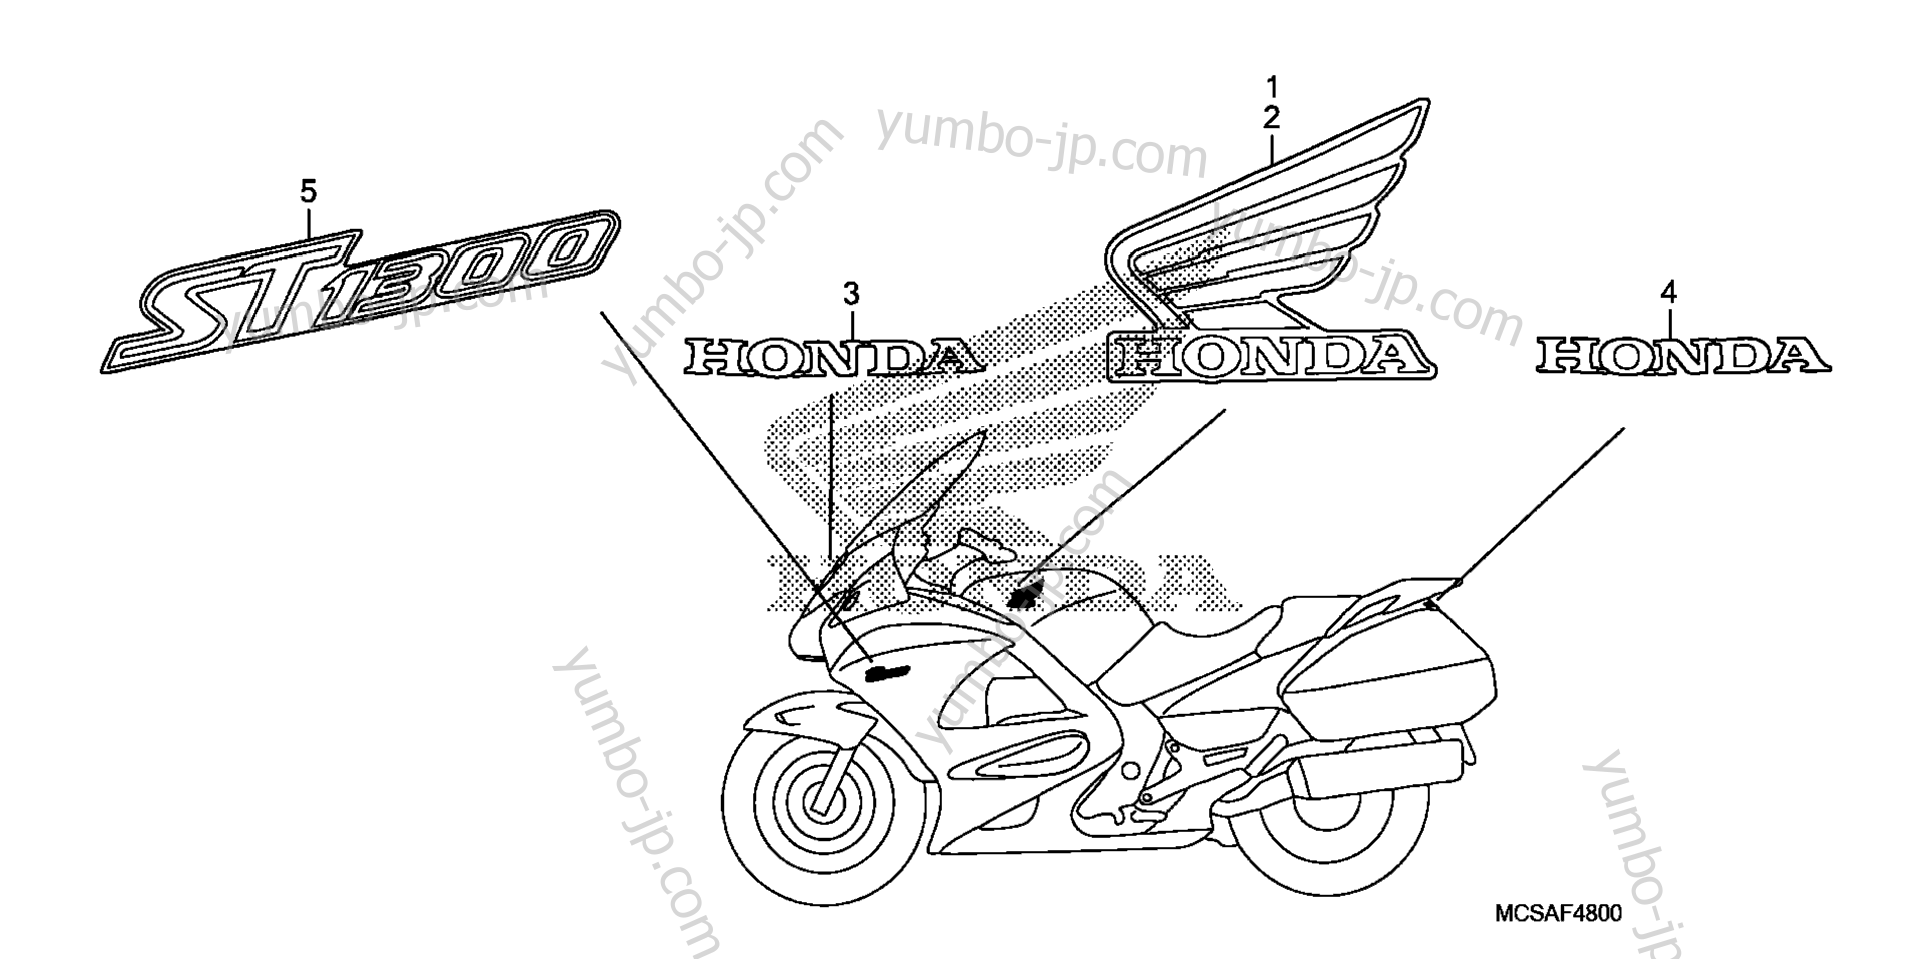 MARKS for motorcycles HONDA ST1300A A 2010 year